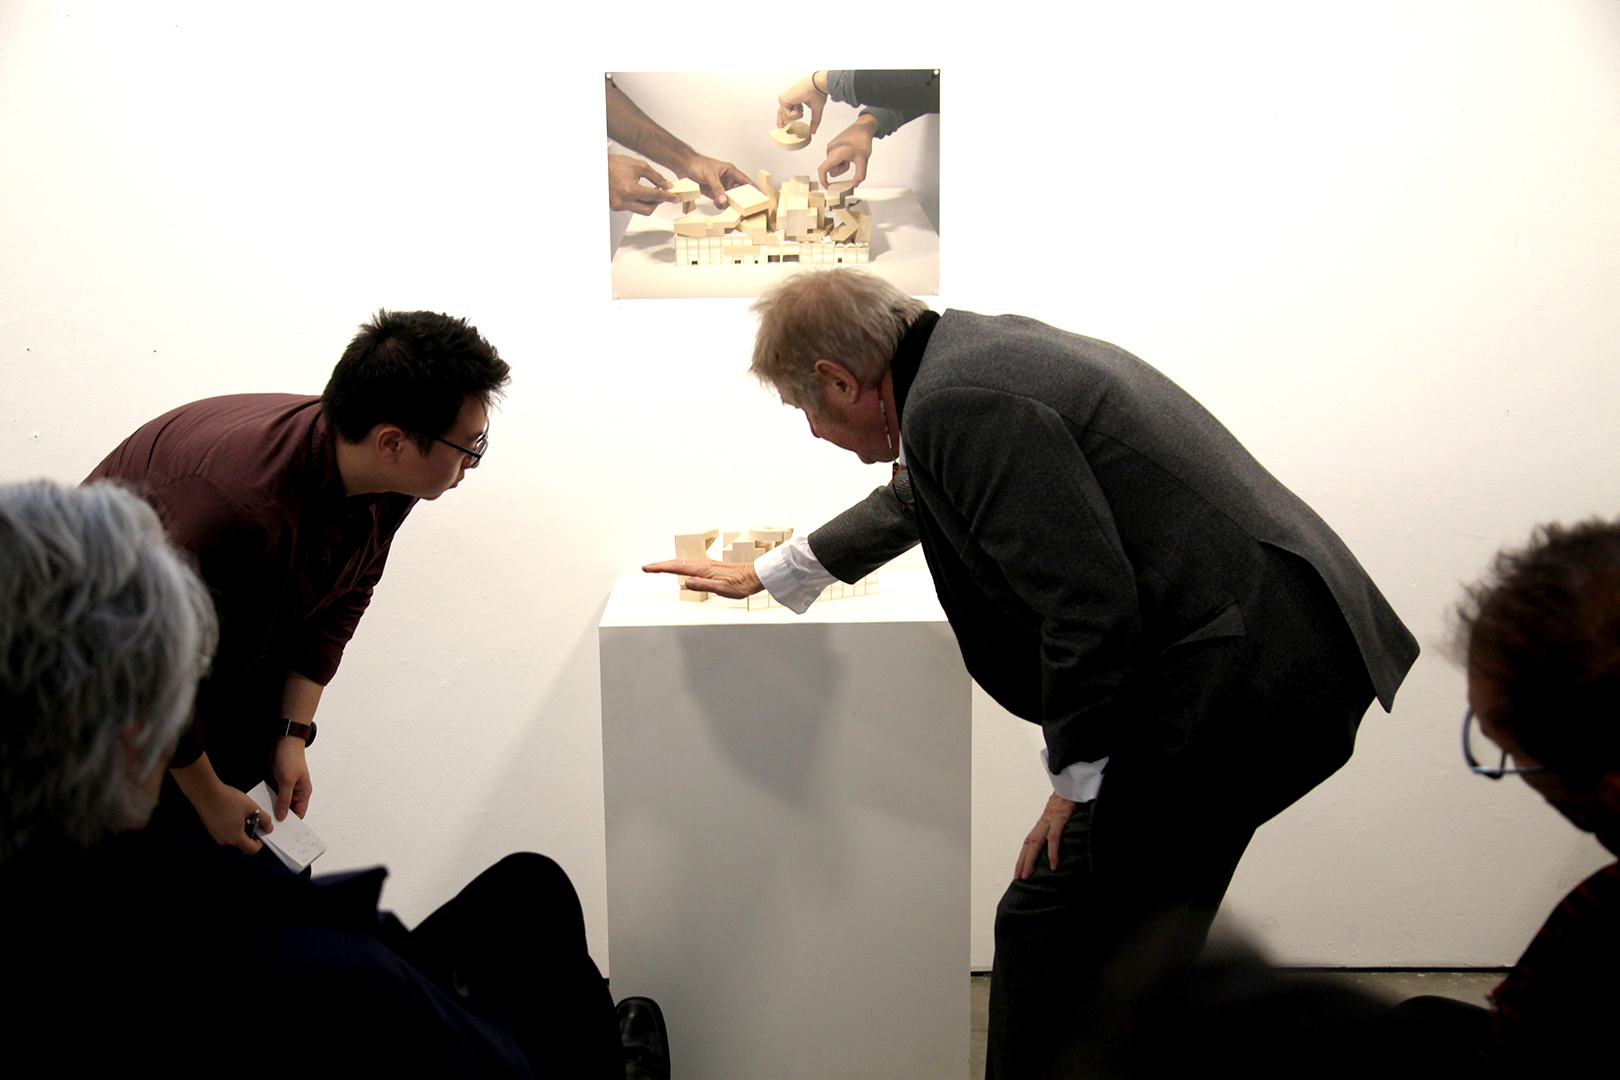 SCI-Arc faculty discussing with a student on an model during presentation